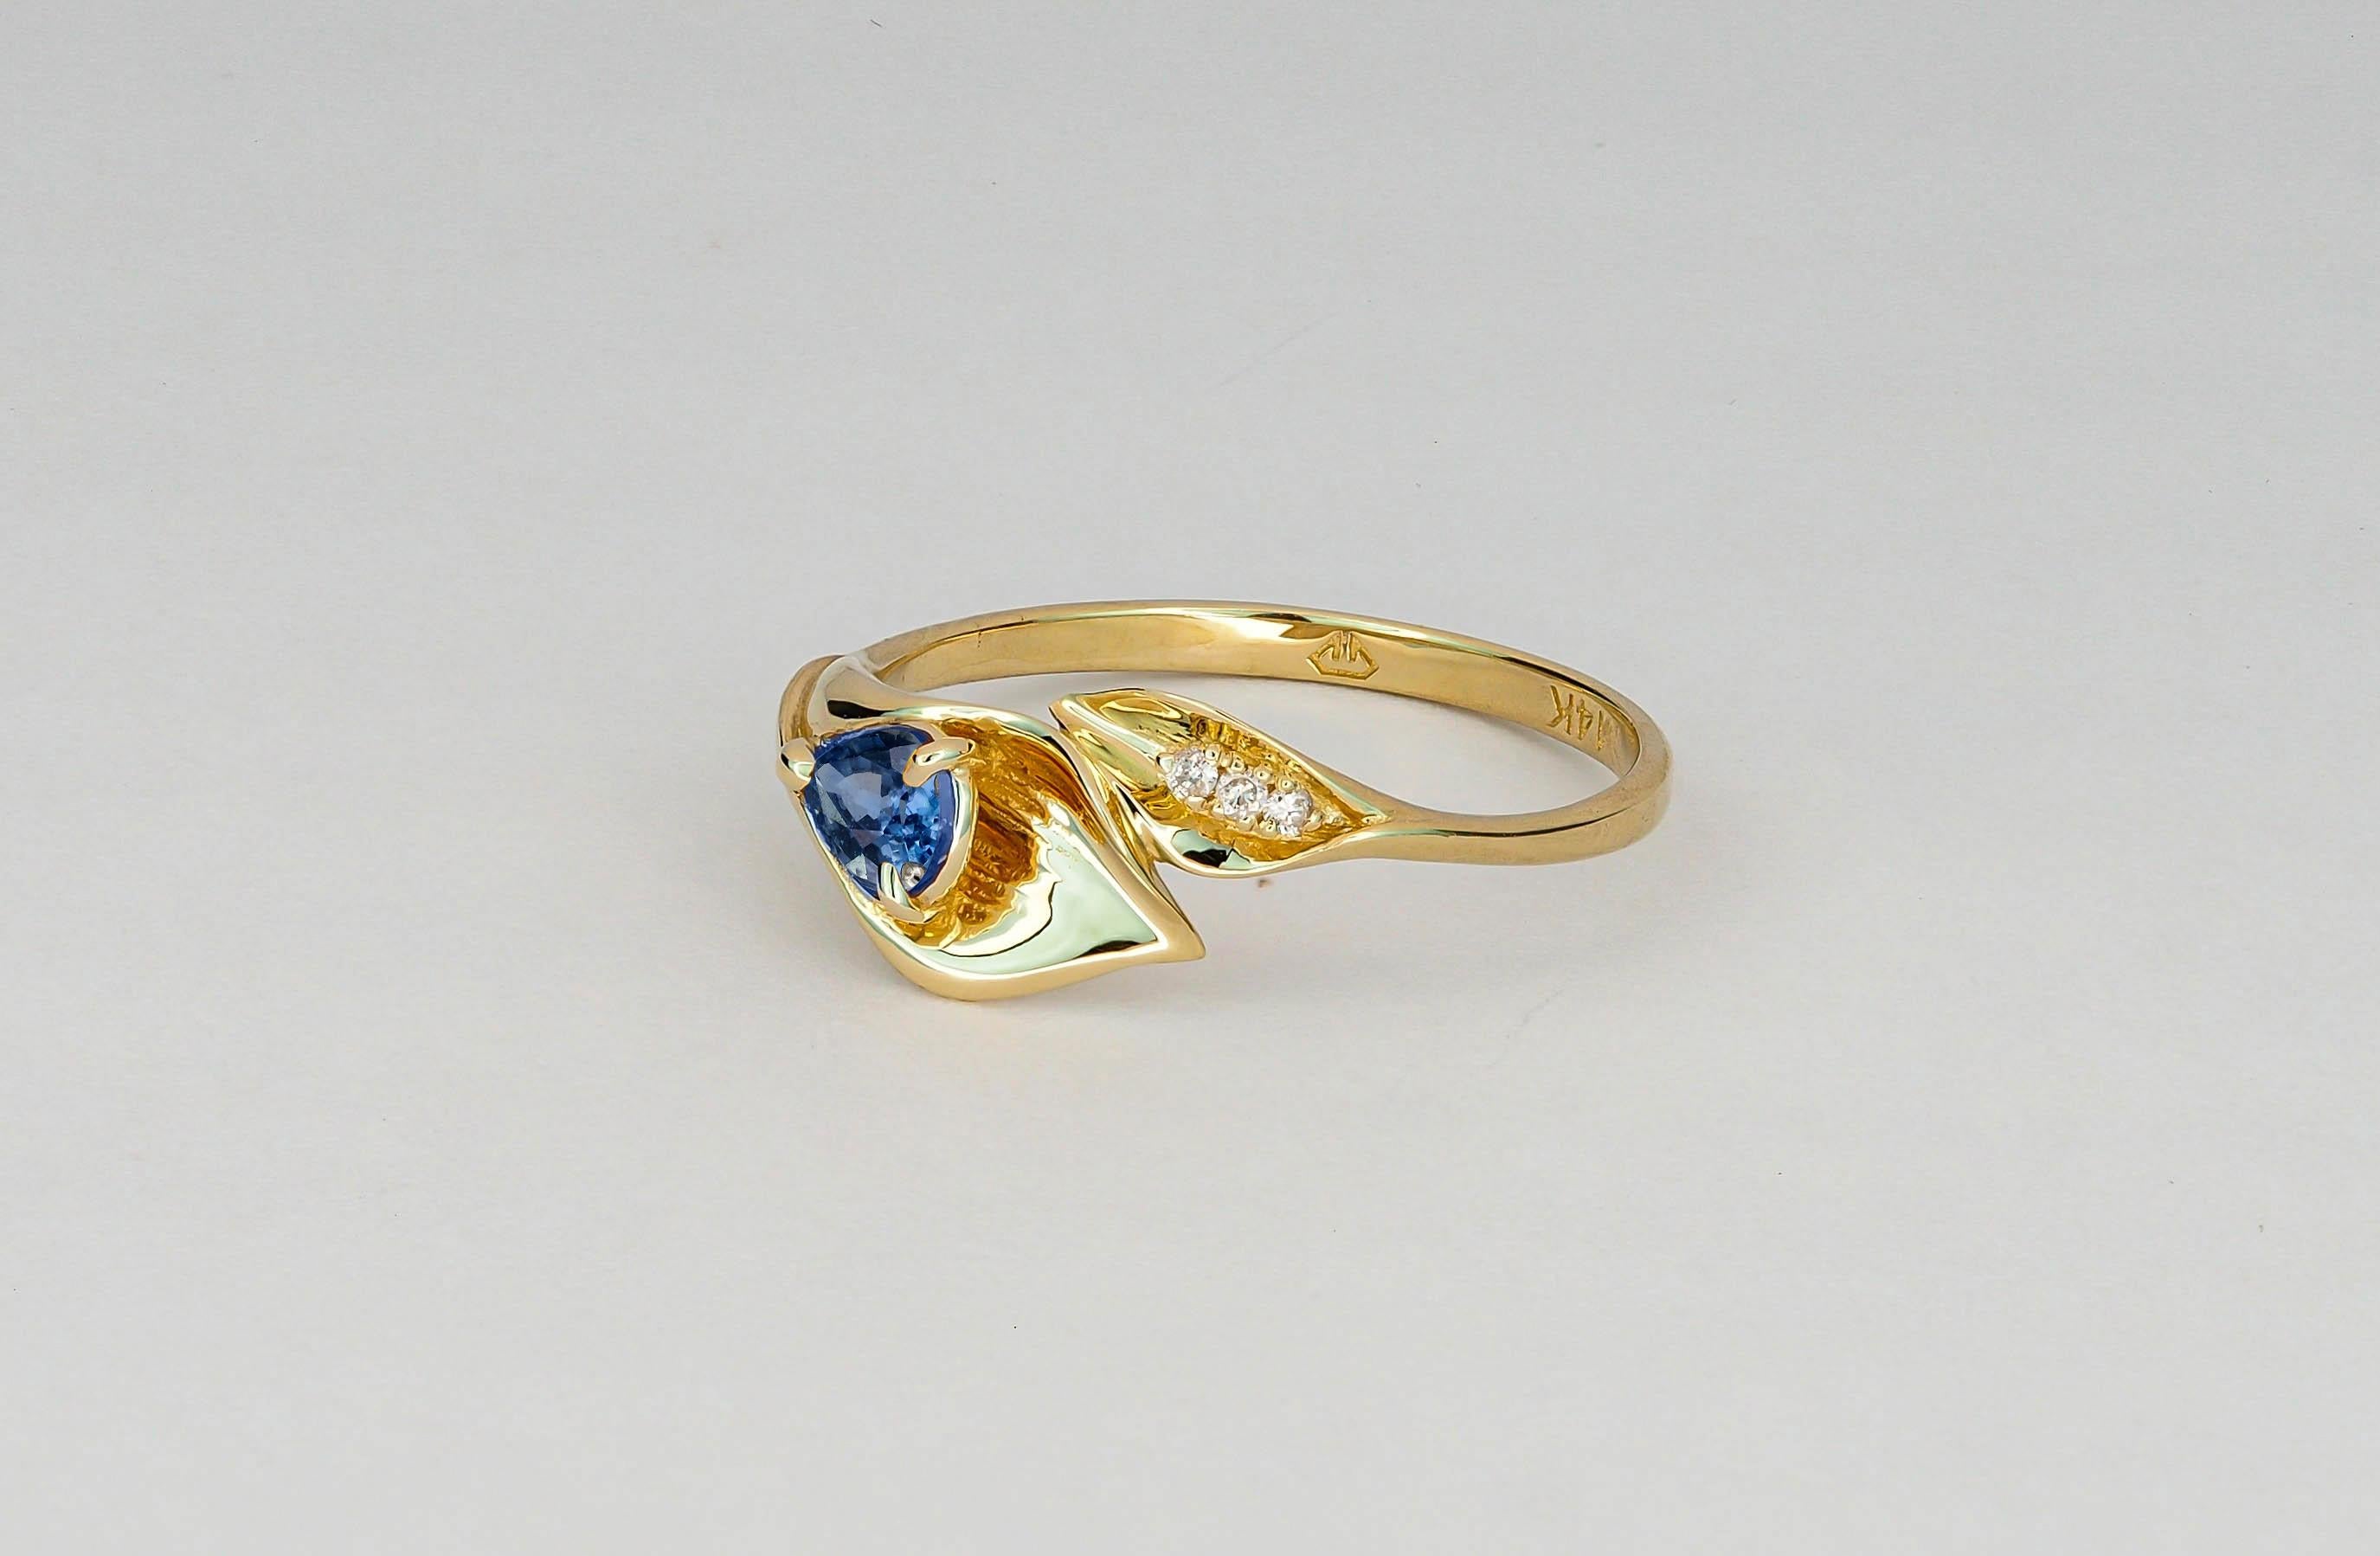 For Sale:  Lily Calla Gold Ring, 14 Karat Gold Ring with Sapphire and Diamonds 4